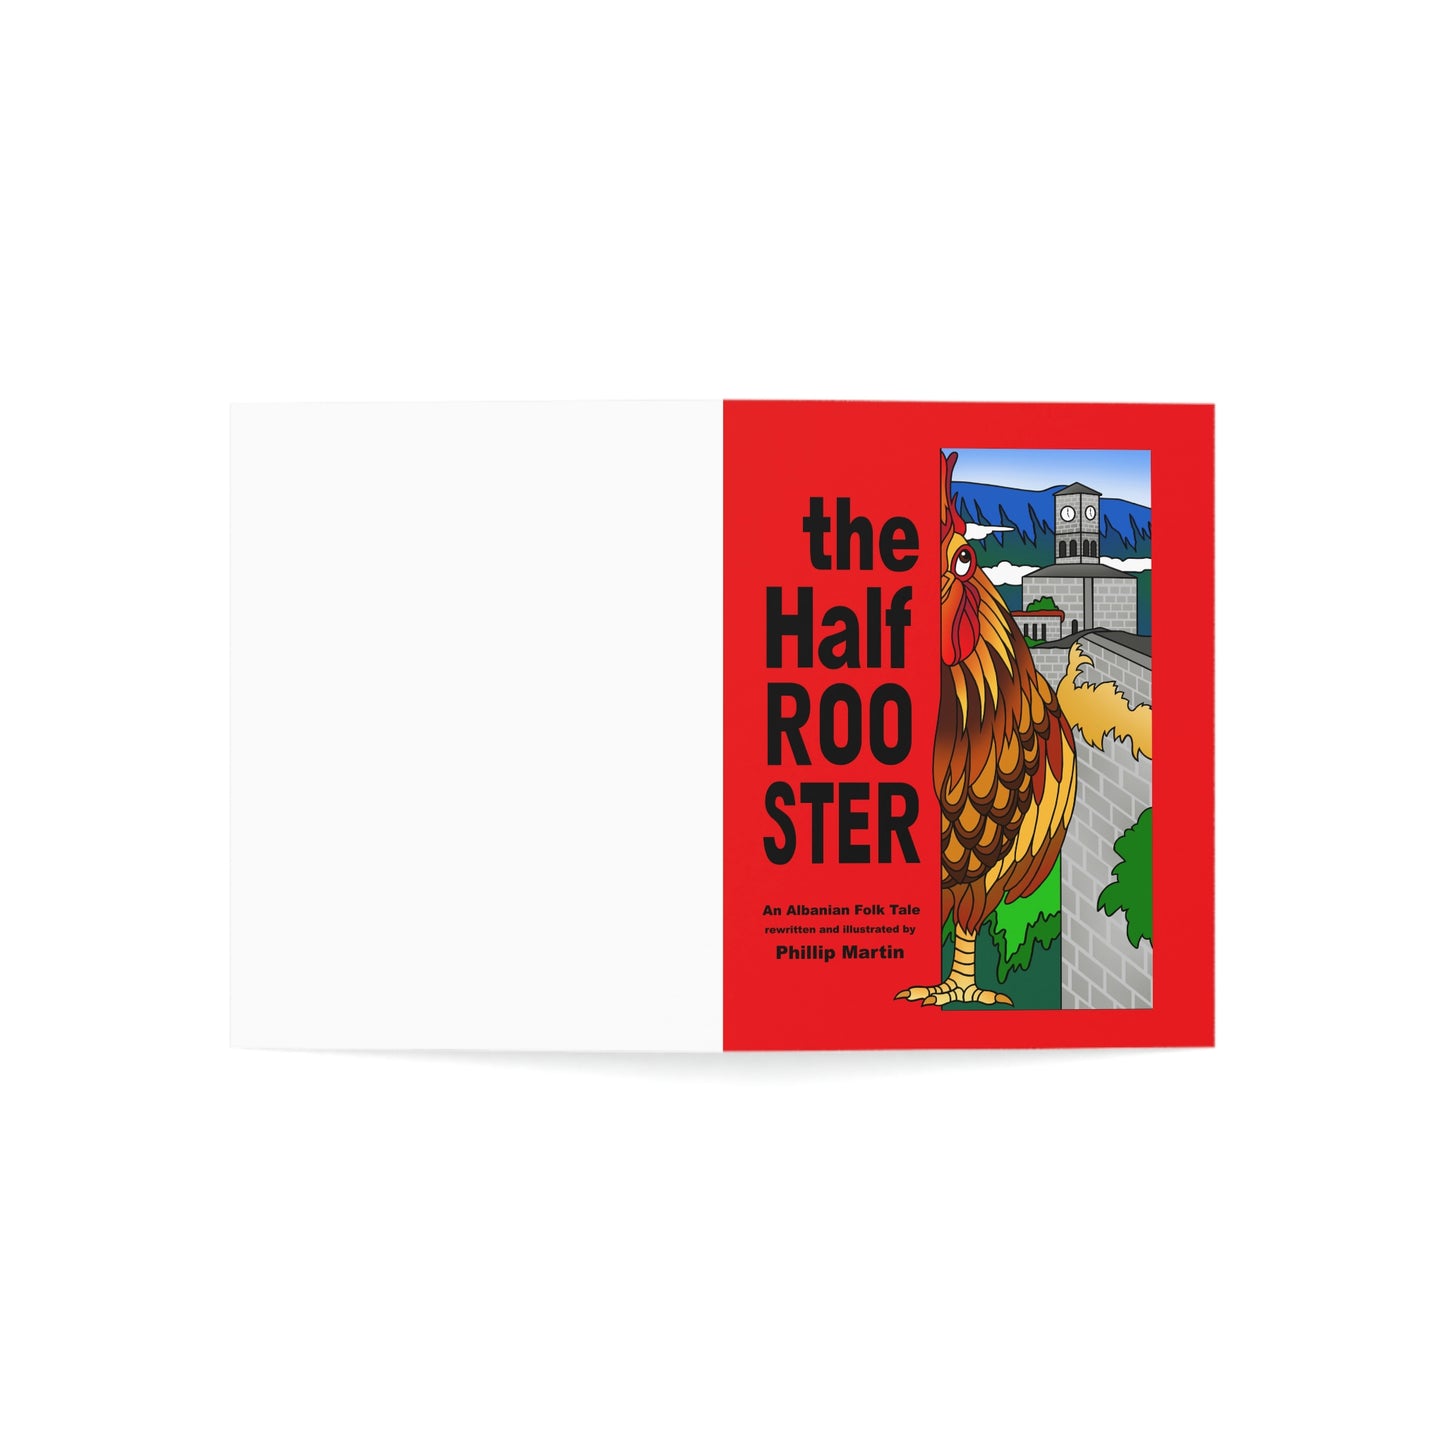 The Half Rooster Greeting Cards (1, 10, 30, and 50pcs)